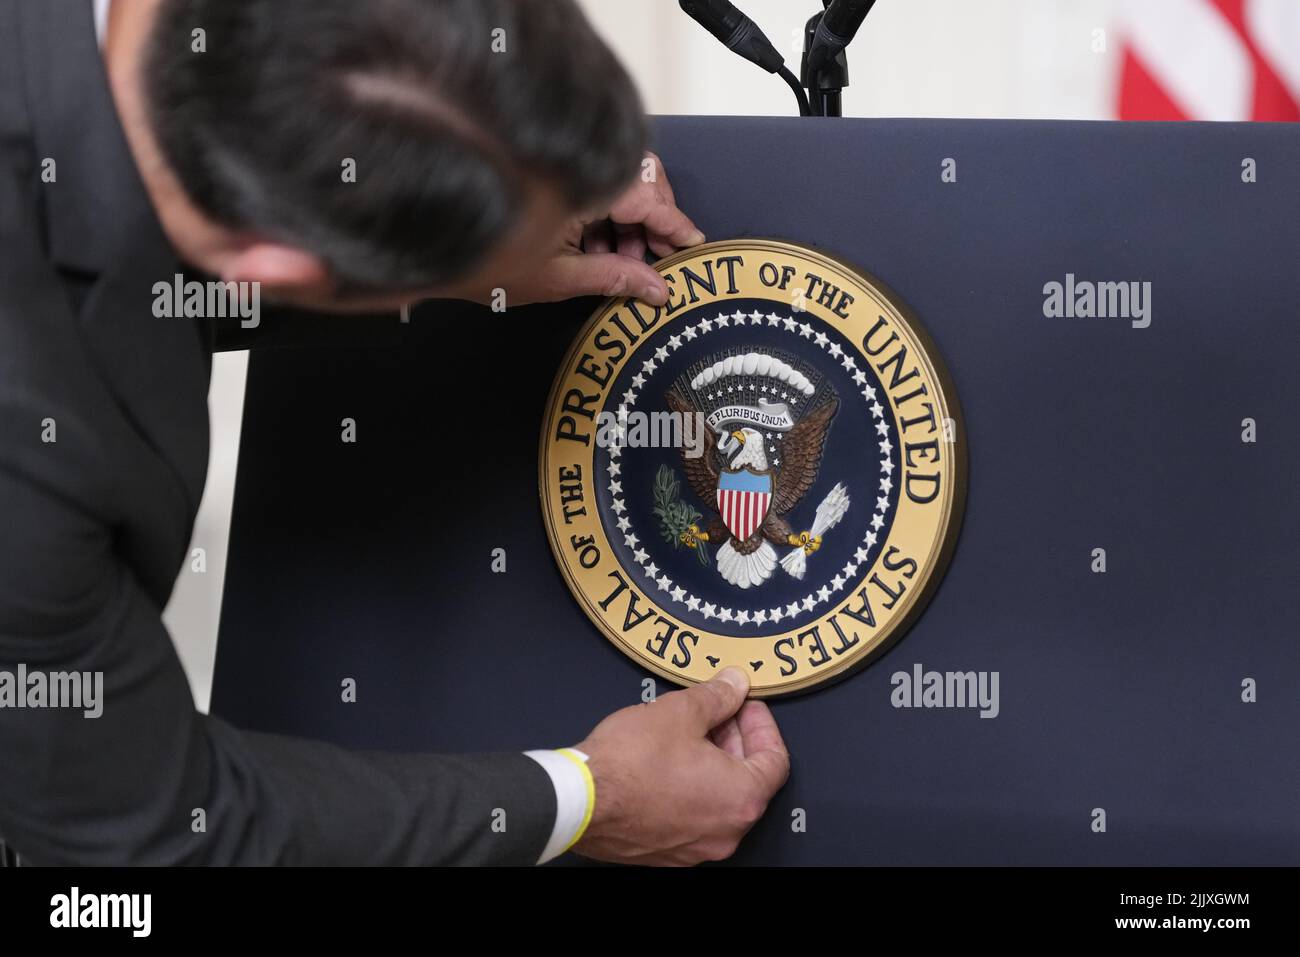 An aide adjusts the seal on the podium prior to United States President Joe Biden delivers remarks on the Inflation Reduction Act of 2022 in the State Dining Room of the White House in Washington, DC on Thursday, July 28, 2022. This legislation, designed fight inflation and lower costs for American families was announced July 27, 2022 by United States Senate Majority Leader Chuck Schumer (Democrat of New York) and US Senator Joe Manchin III (Democrat of West Virginia). Credit: Chris Kleponis/Pool via CNP /MediaPunch Stock Photo